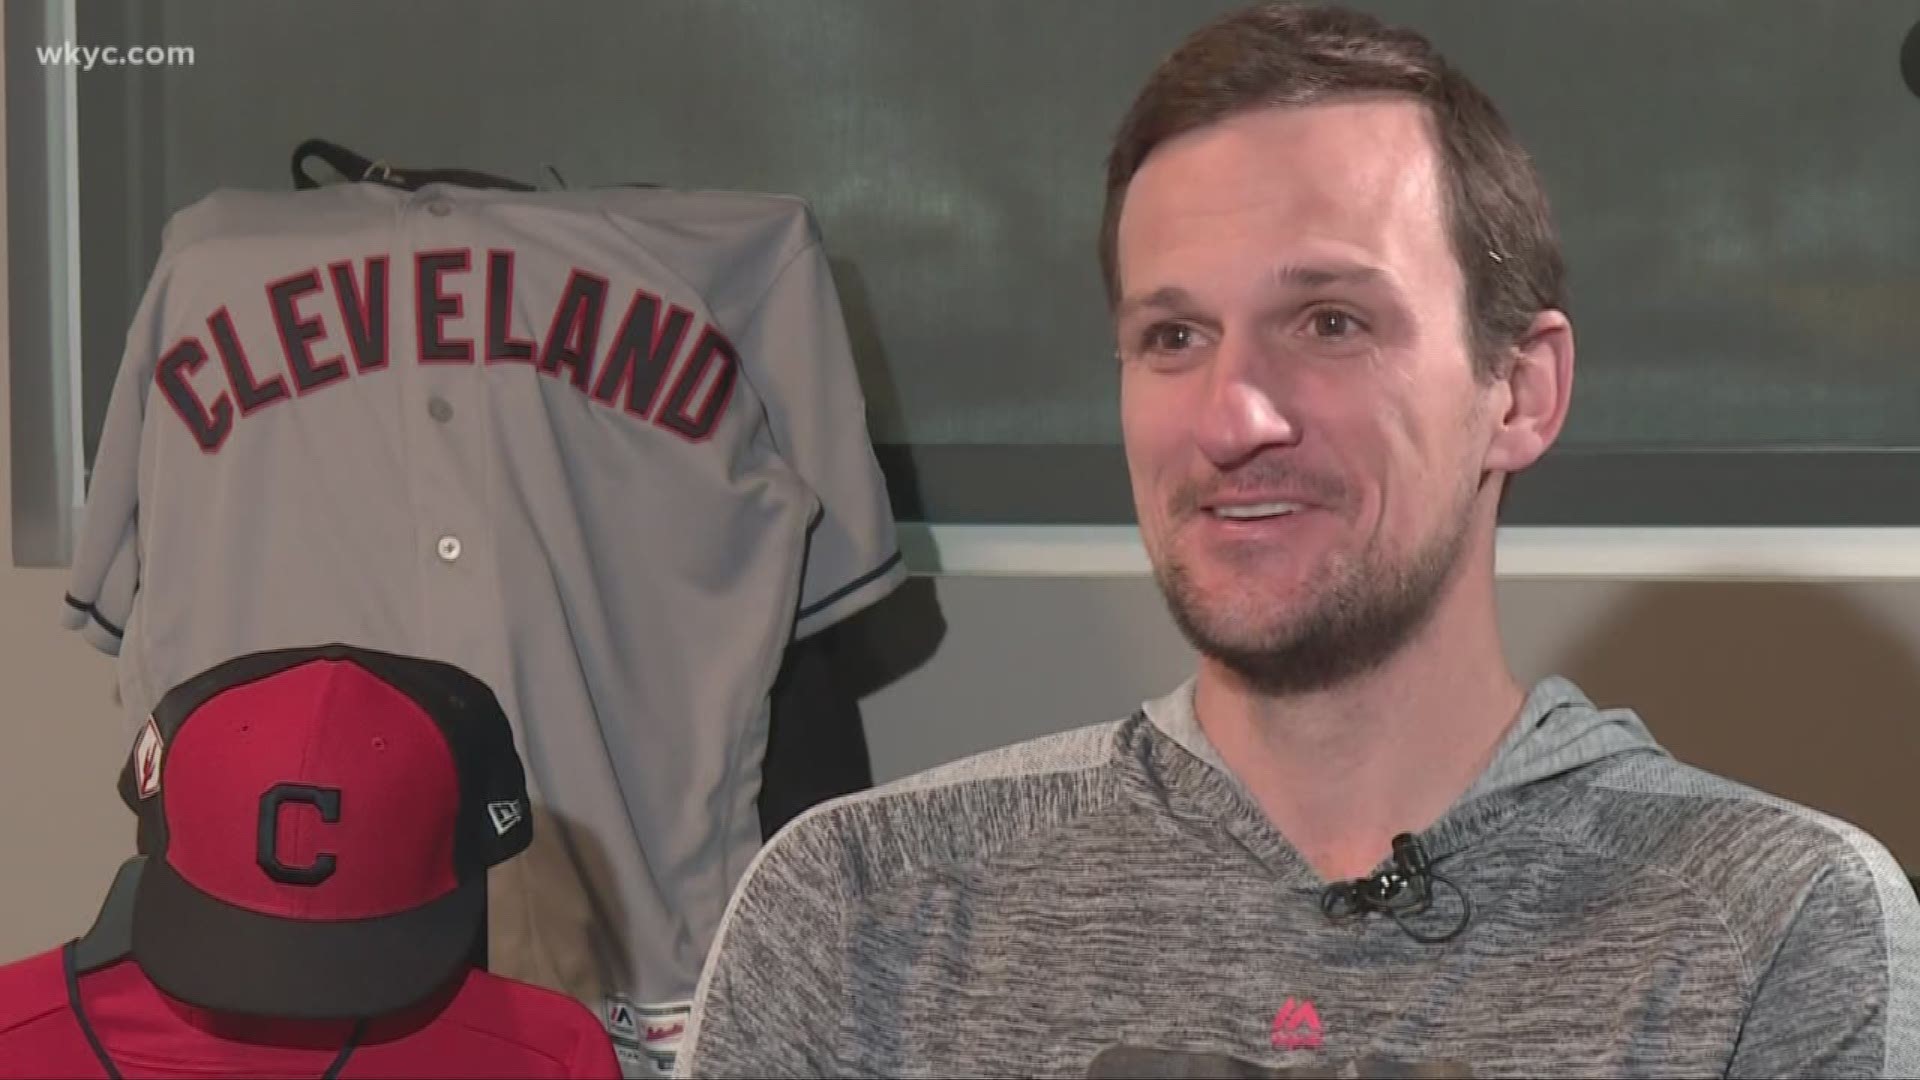 Aug. 7, 2019: Get to know more about Cleveland Indians pitcher Dan Otero as he reveals secrets about his personal life during an in-depth conversation with WKYC's Dave Chudowsky. Welcome to the latest edition of 'Beyond the Dugout.'